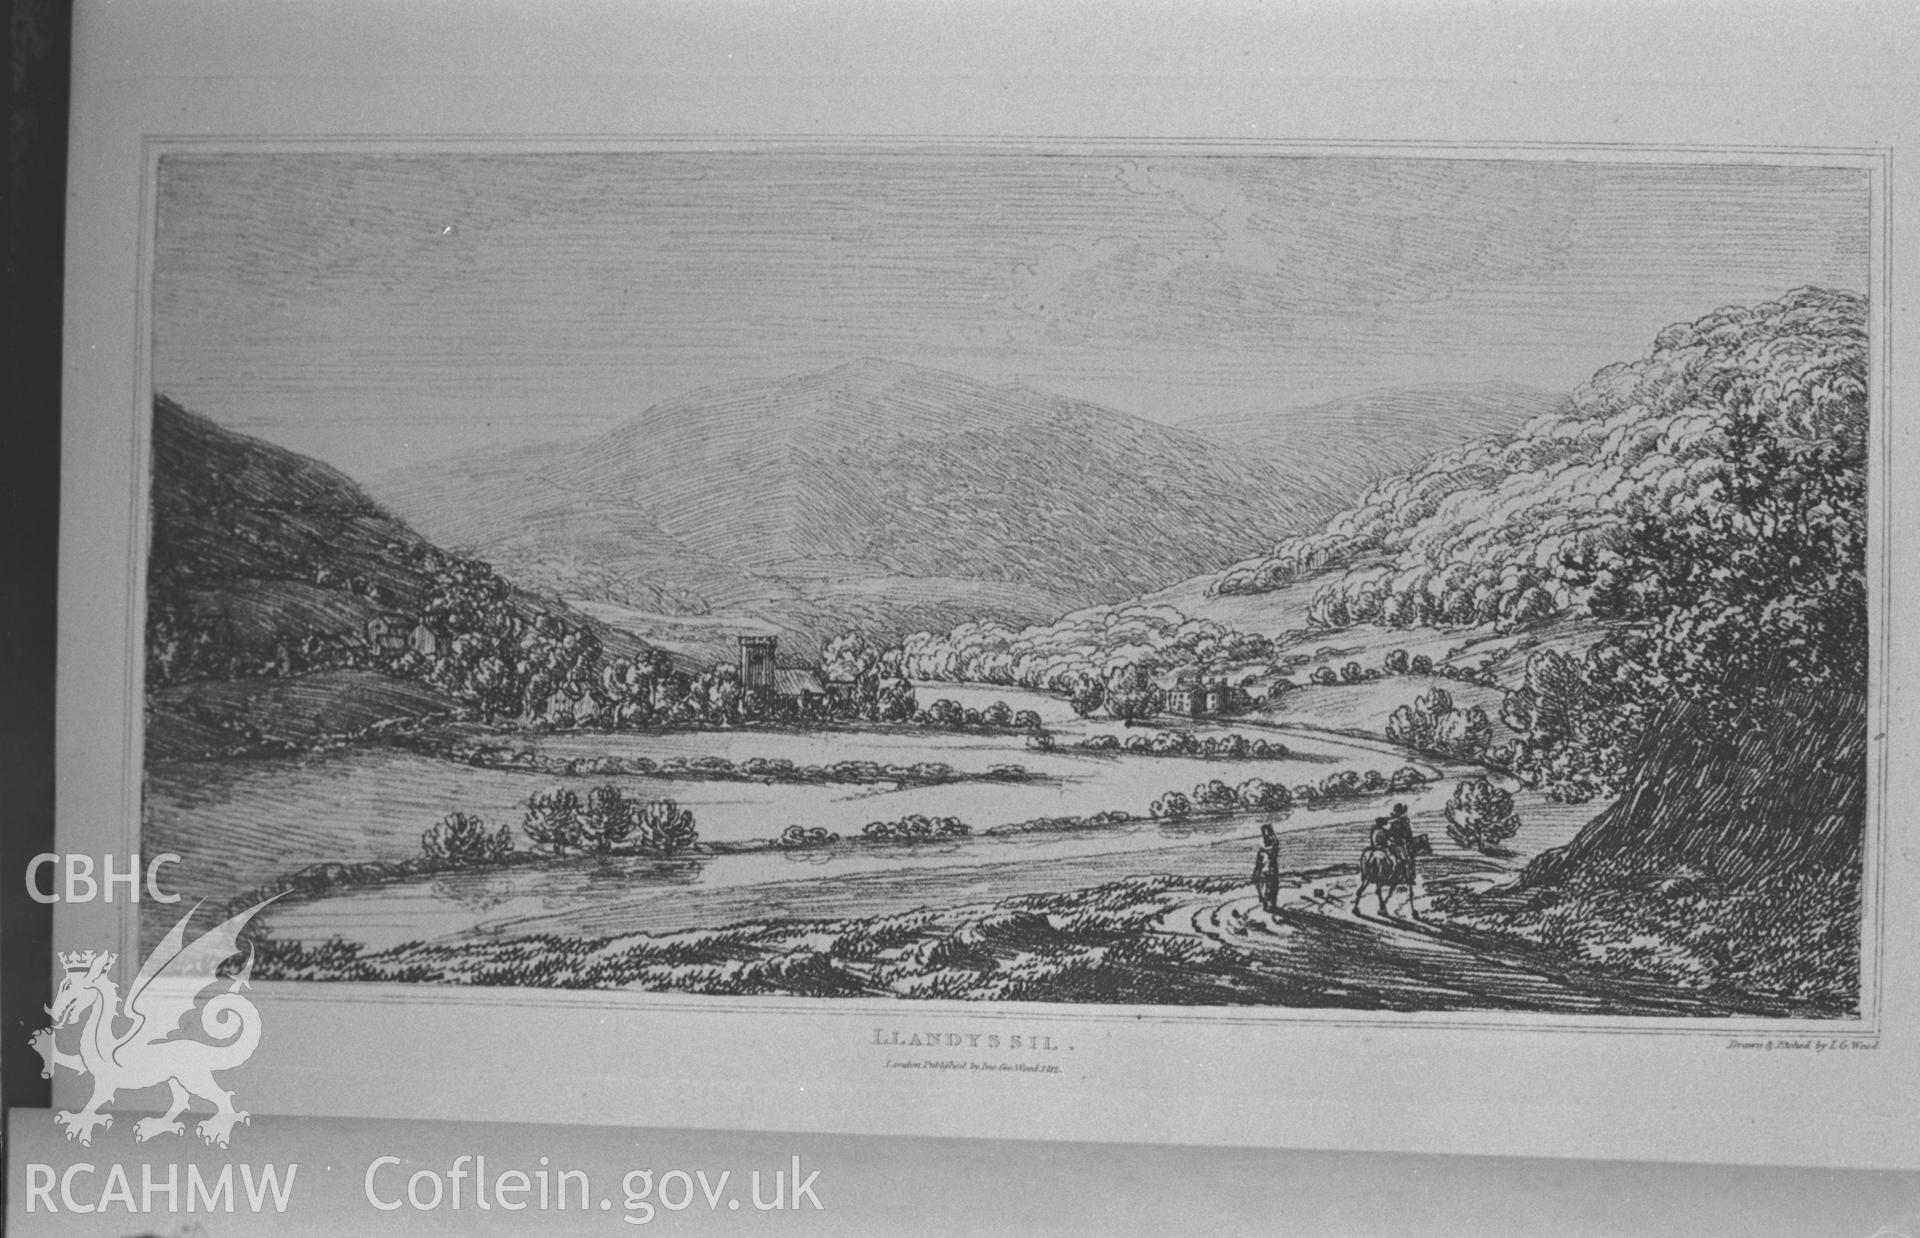 'Llandyssil' drawn and engraved by J. G. Woods, c.1810. Photographed by Arthur O. Chater in January 1968 for his own private research.